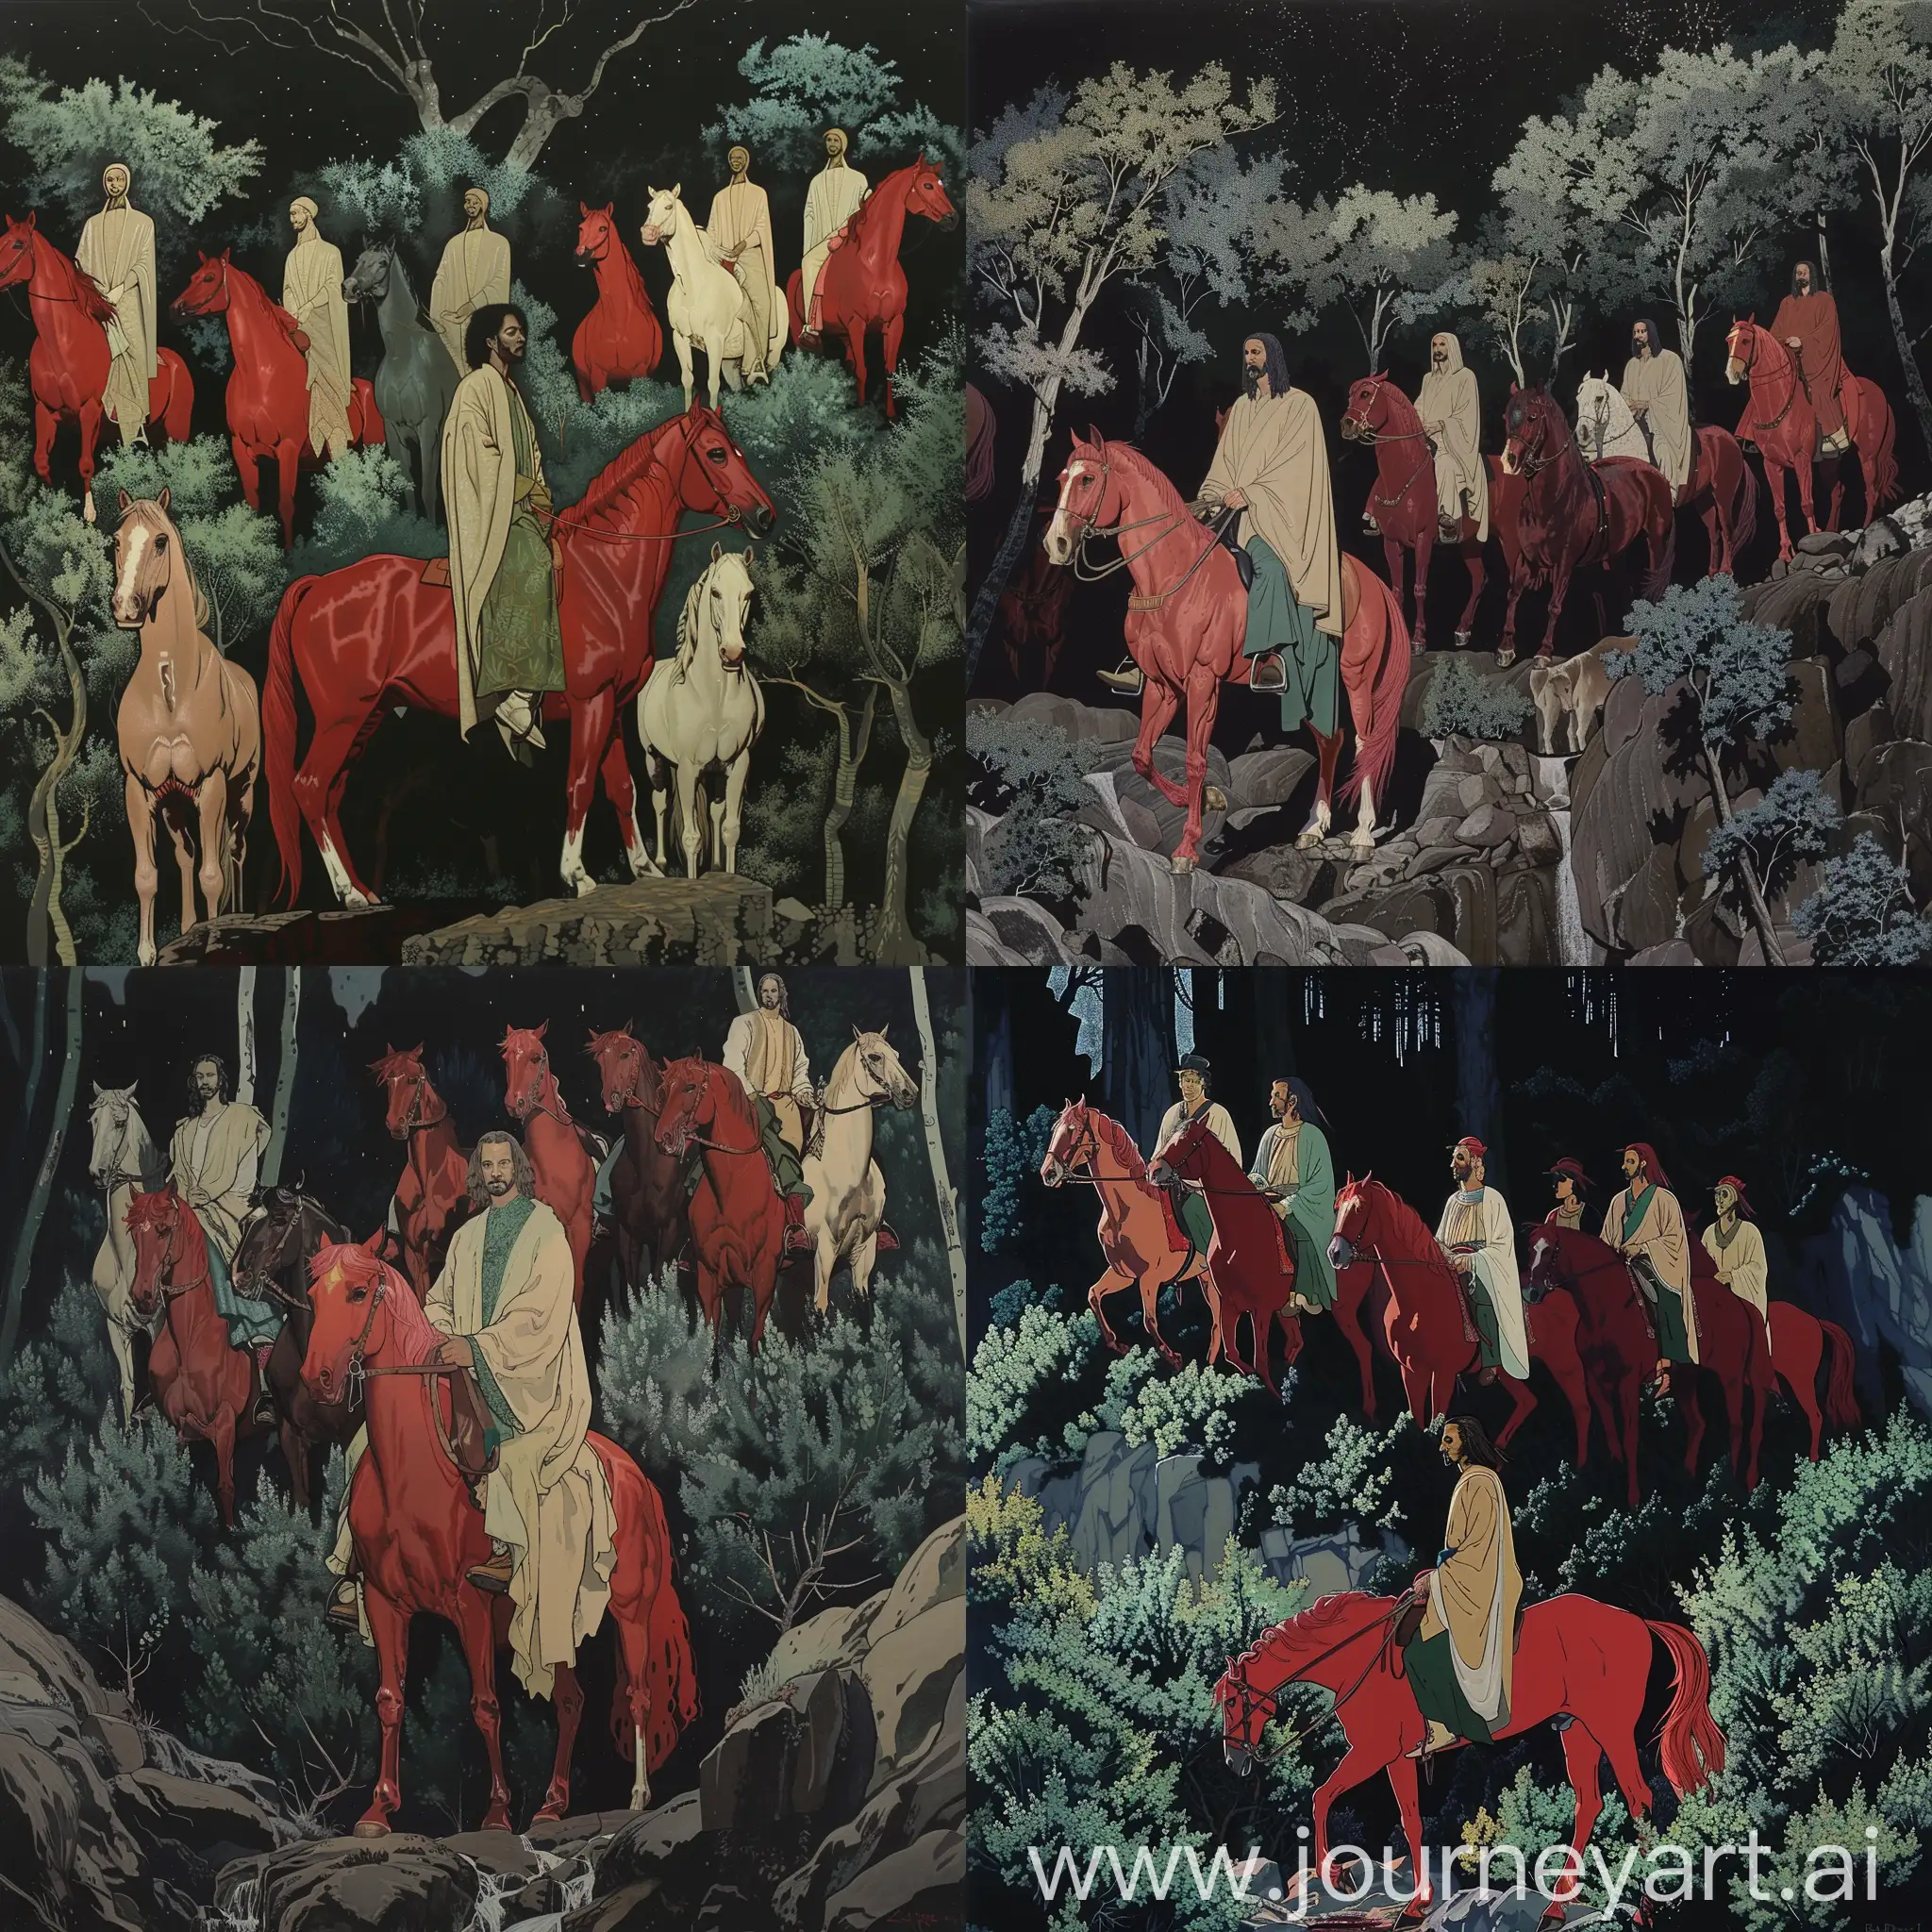 Mystical-Night-Rider-Leading-a-Brigade-of-Colorful-Horses-in-Myrtle-Ravine